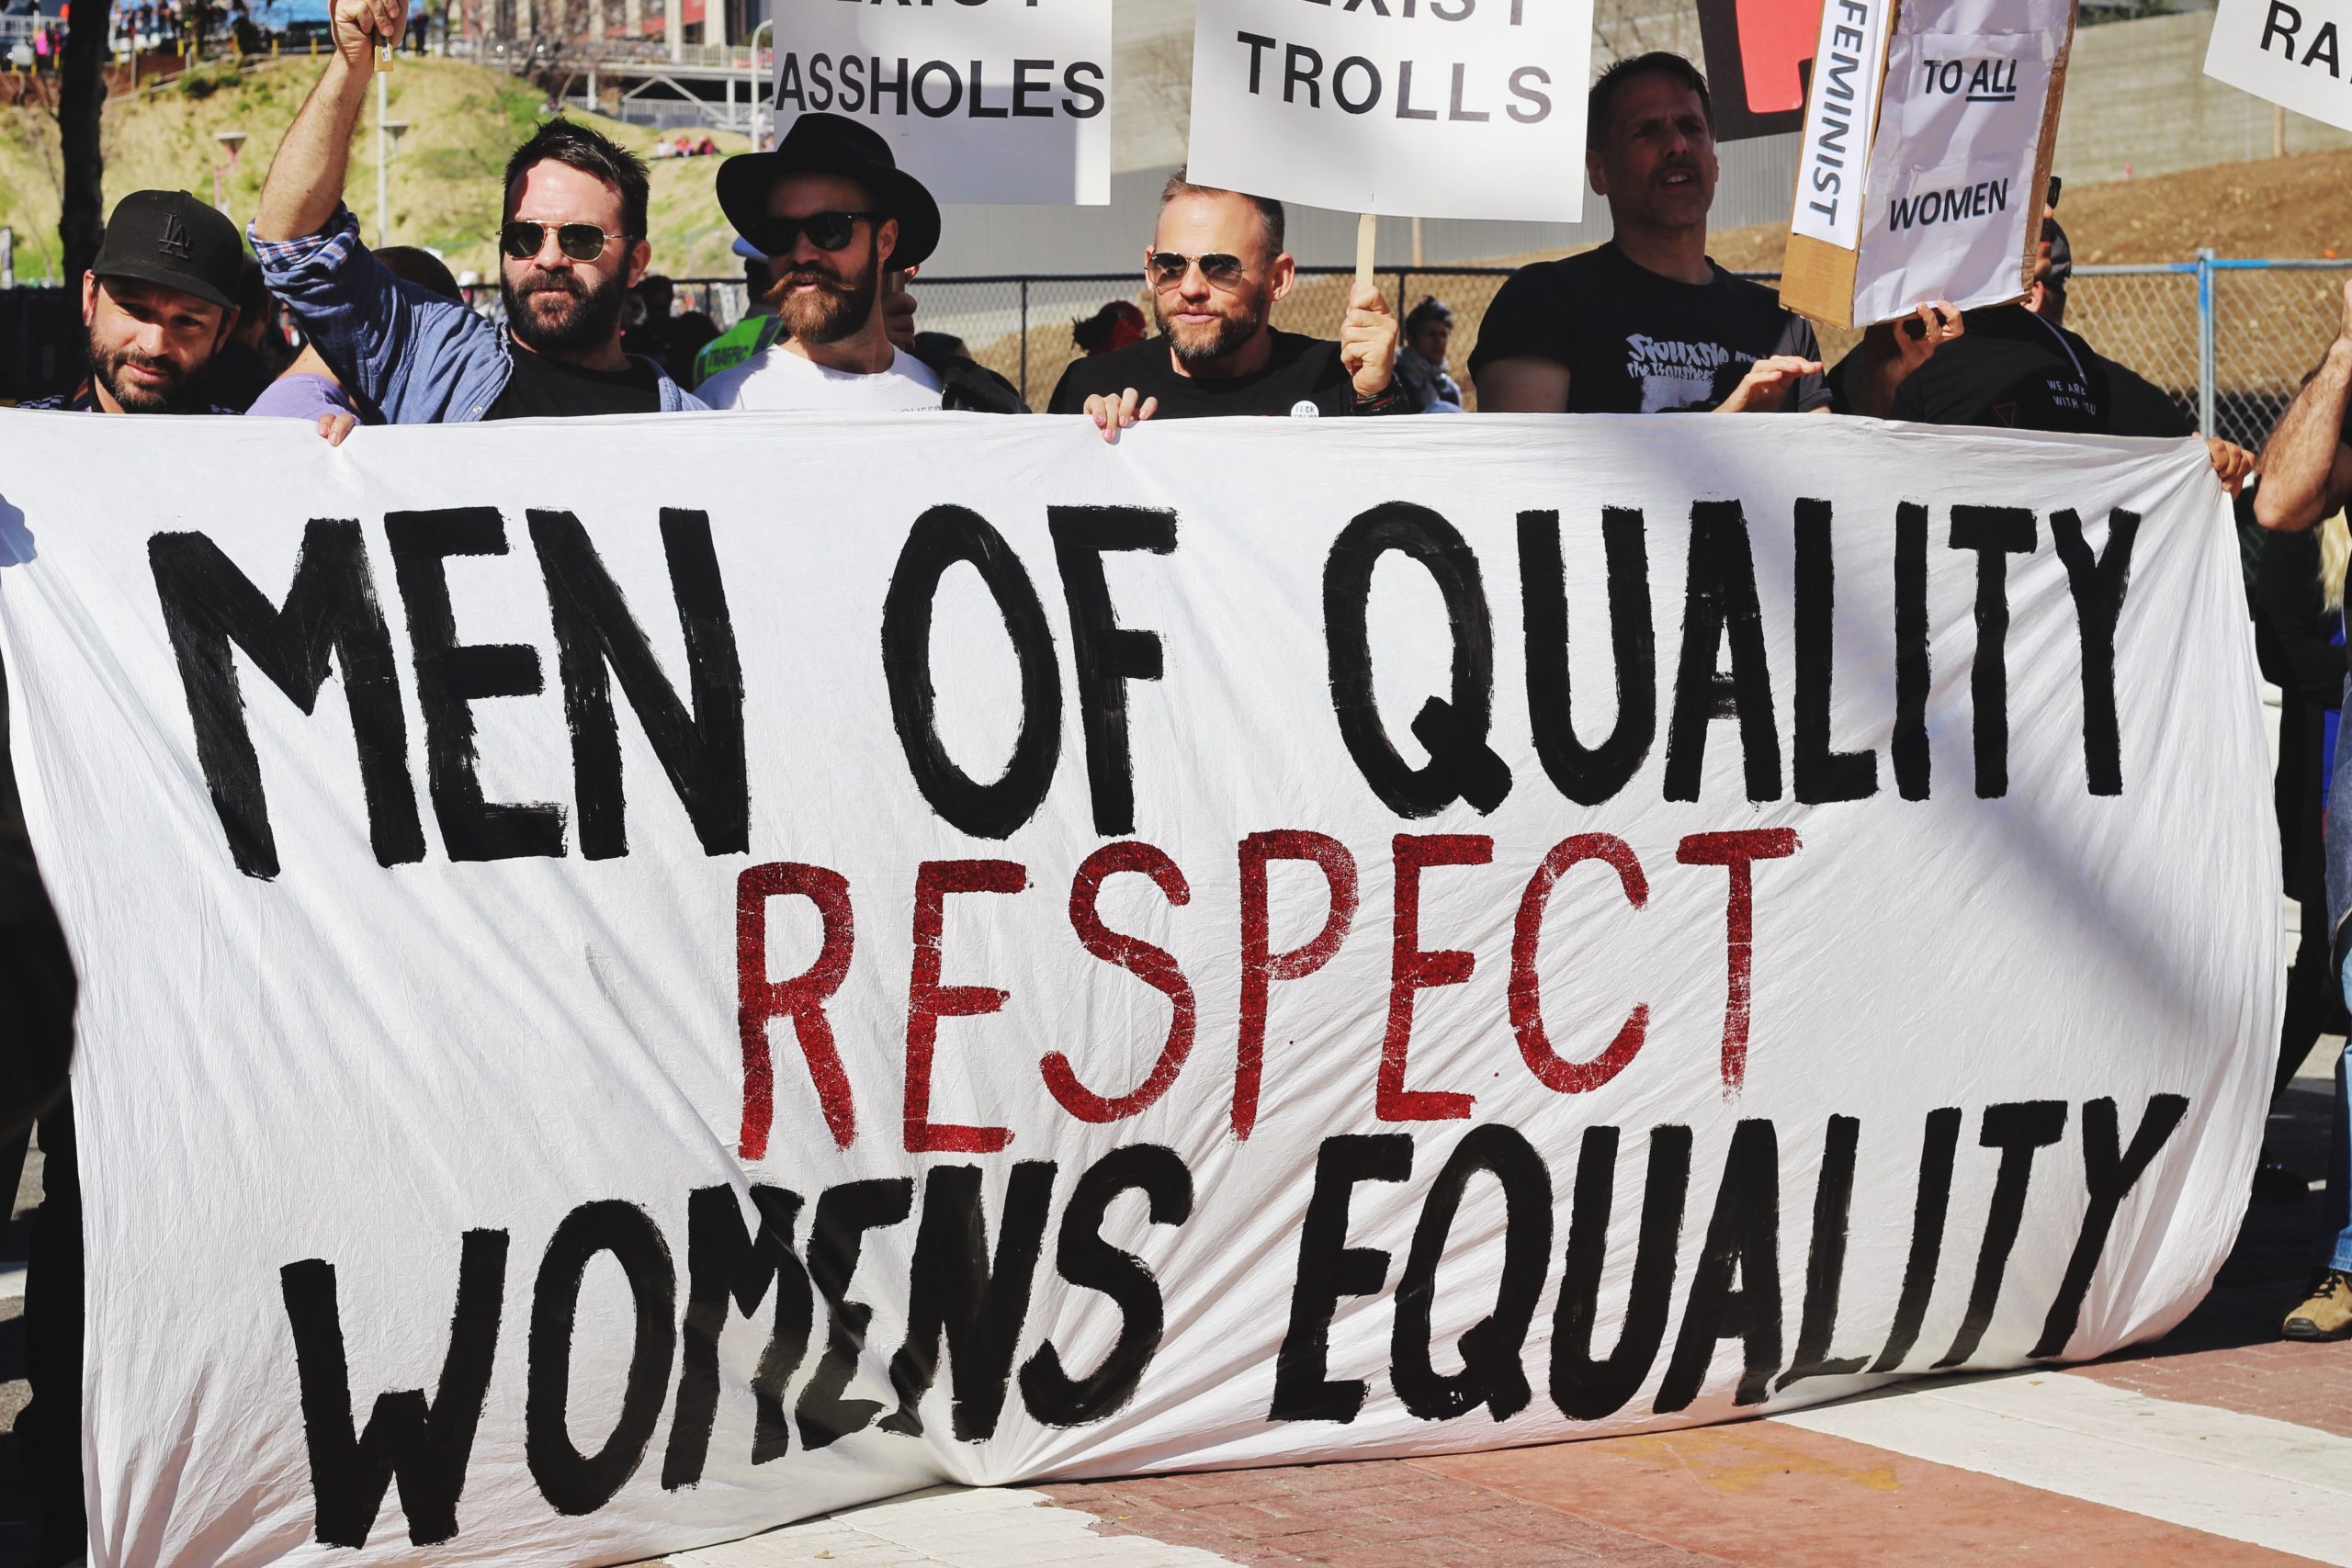 Men holding large sign that says "men of quality respect women's equality"